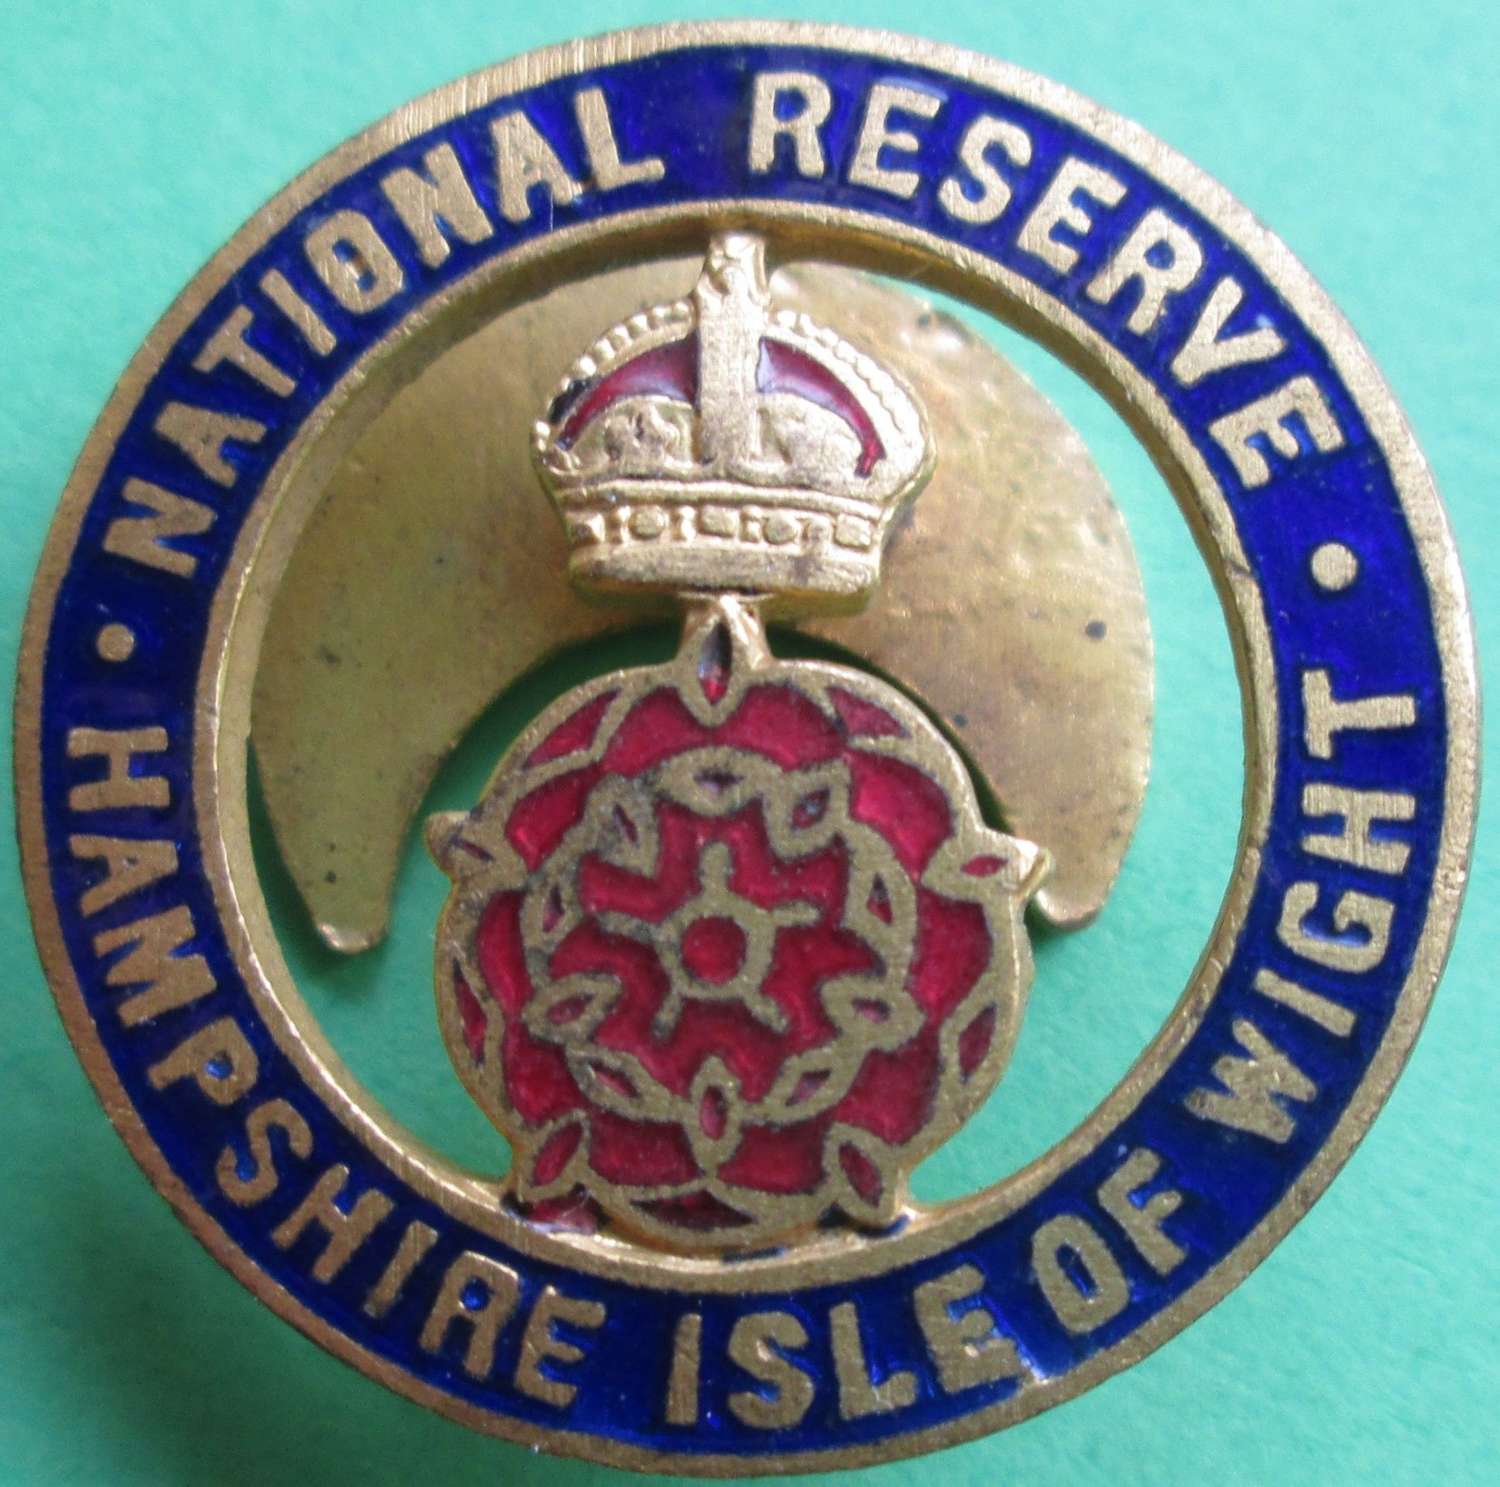 A HAMPSHIRE ISLE OF WIGHT NATIONAL RESERVE LAPEL BADGE